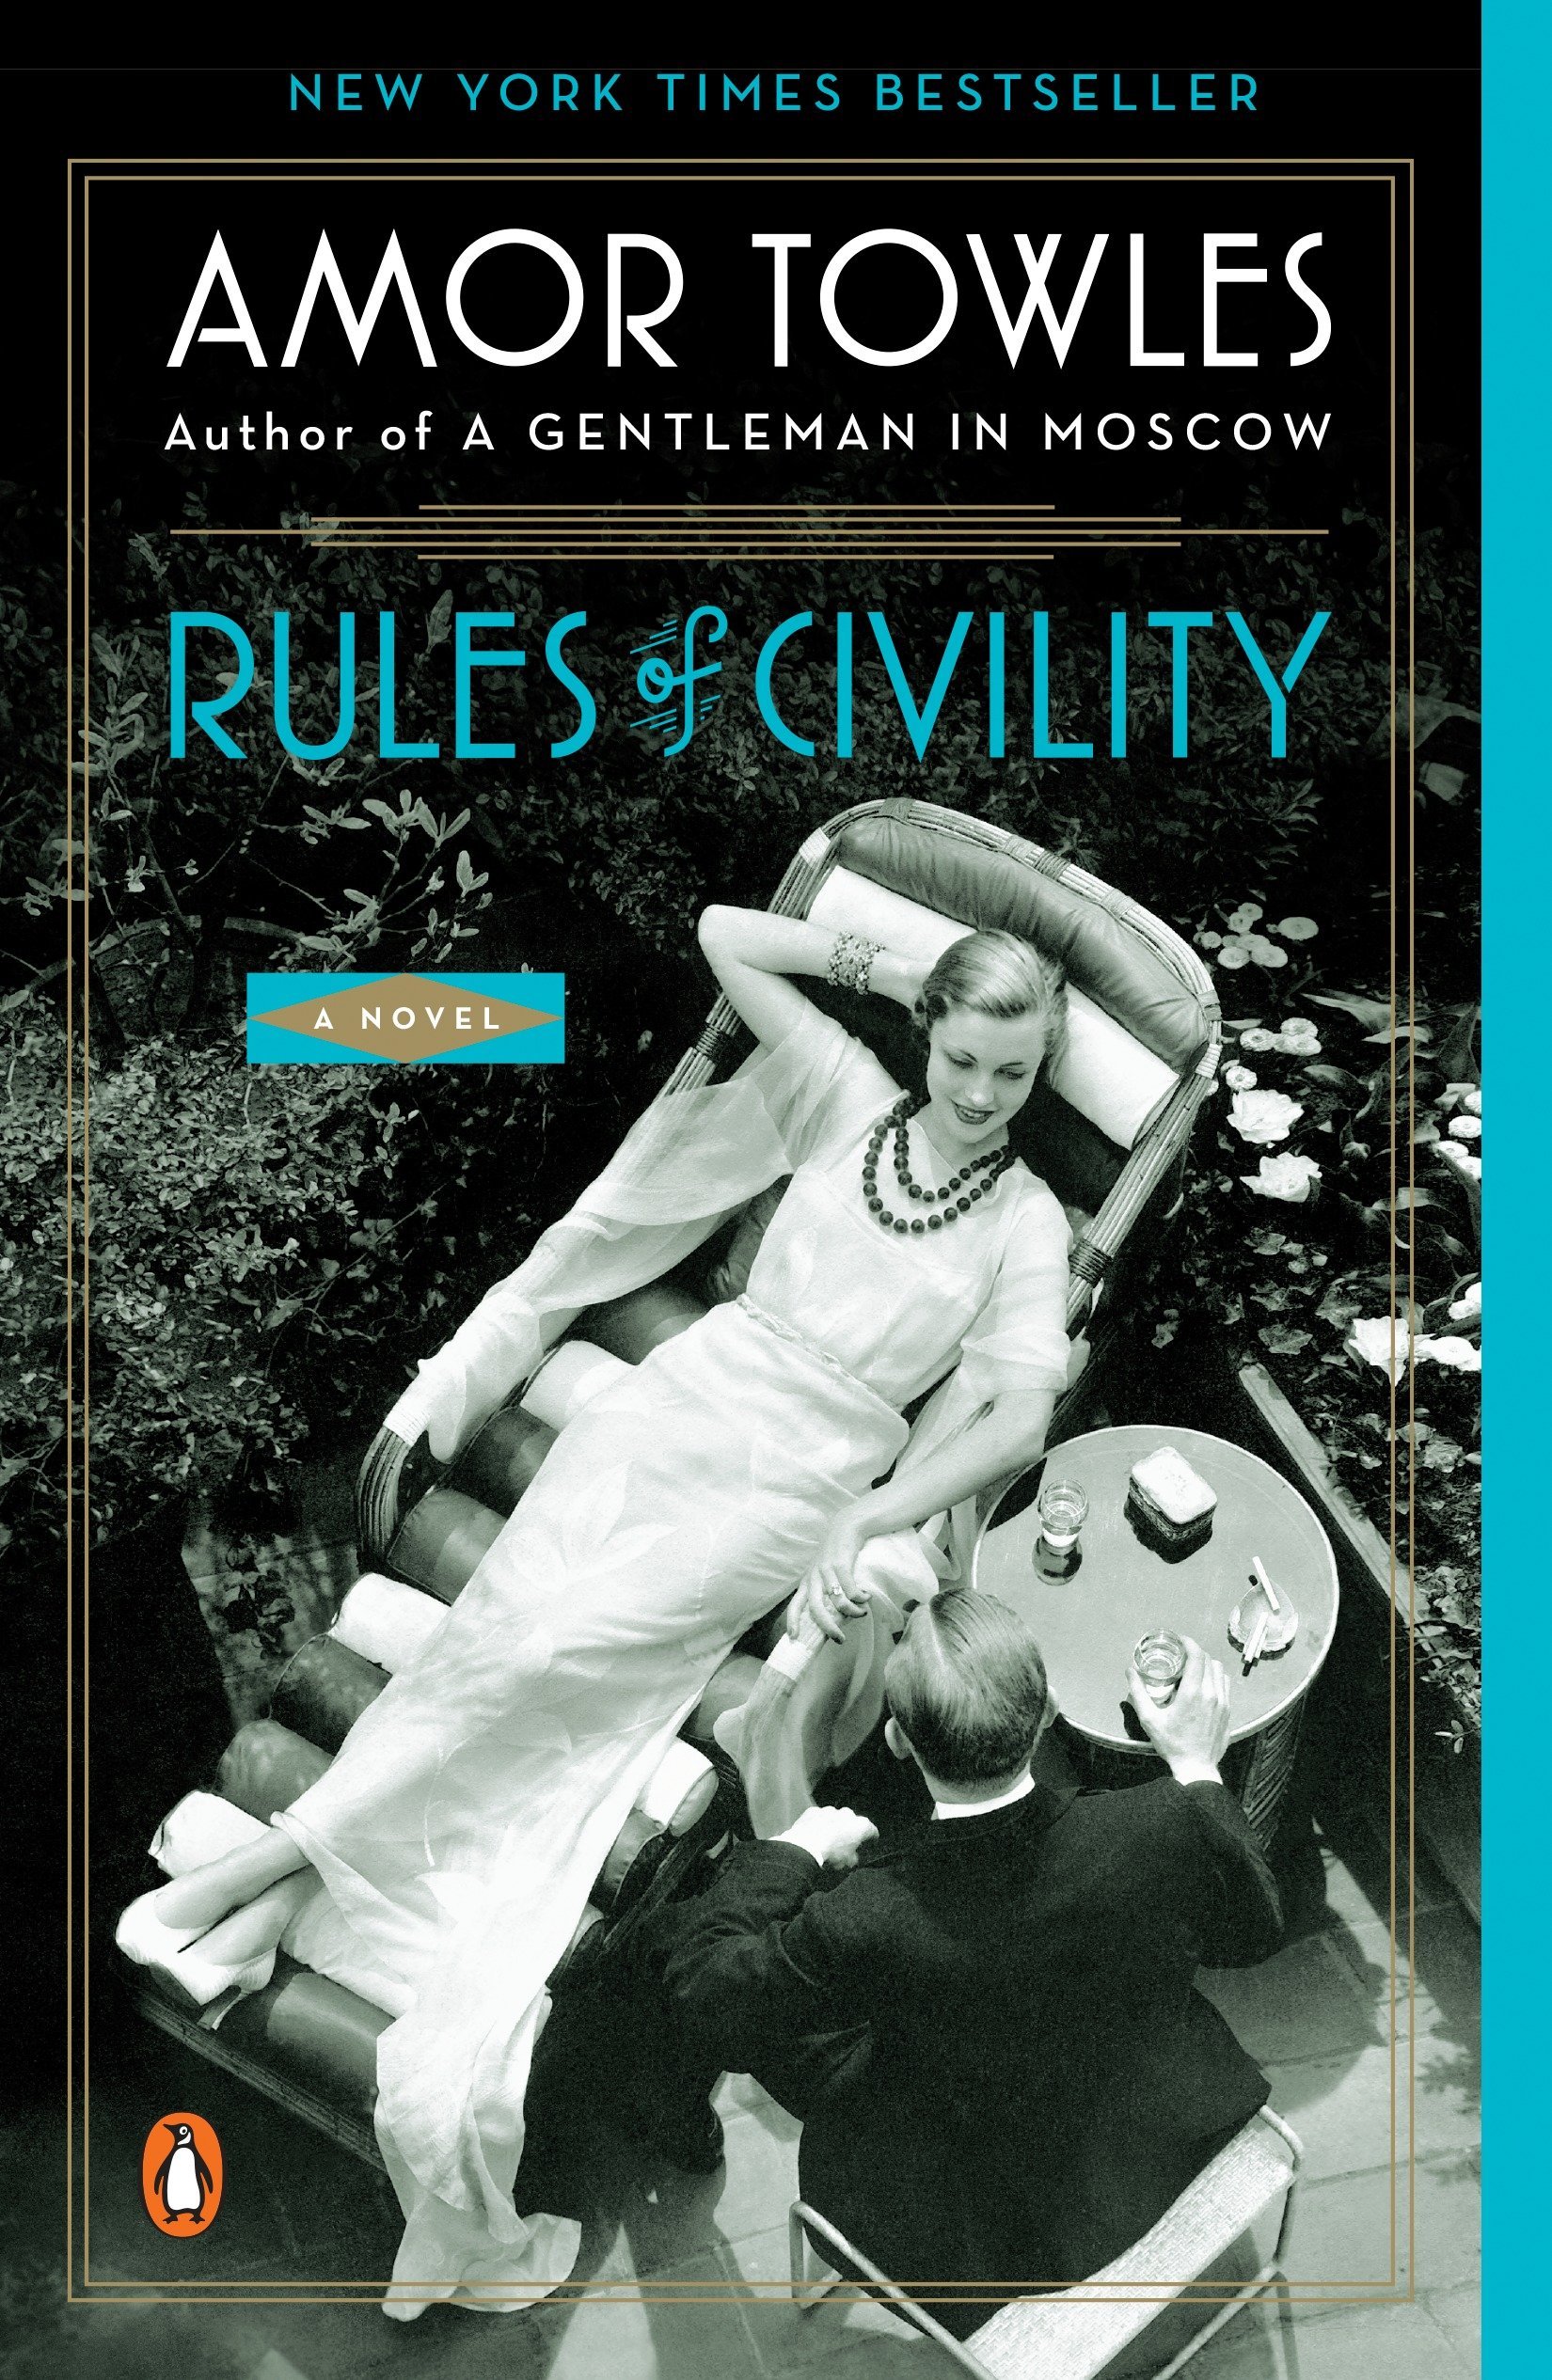 Book cover of "Rules of Civility".